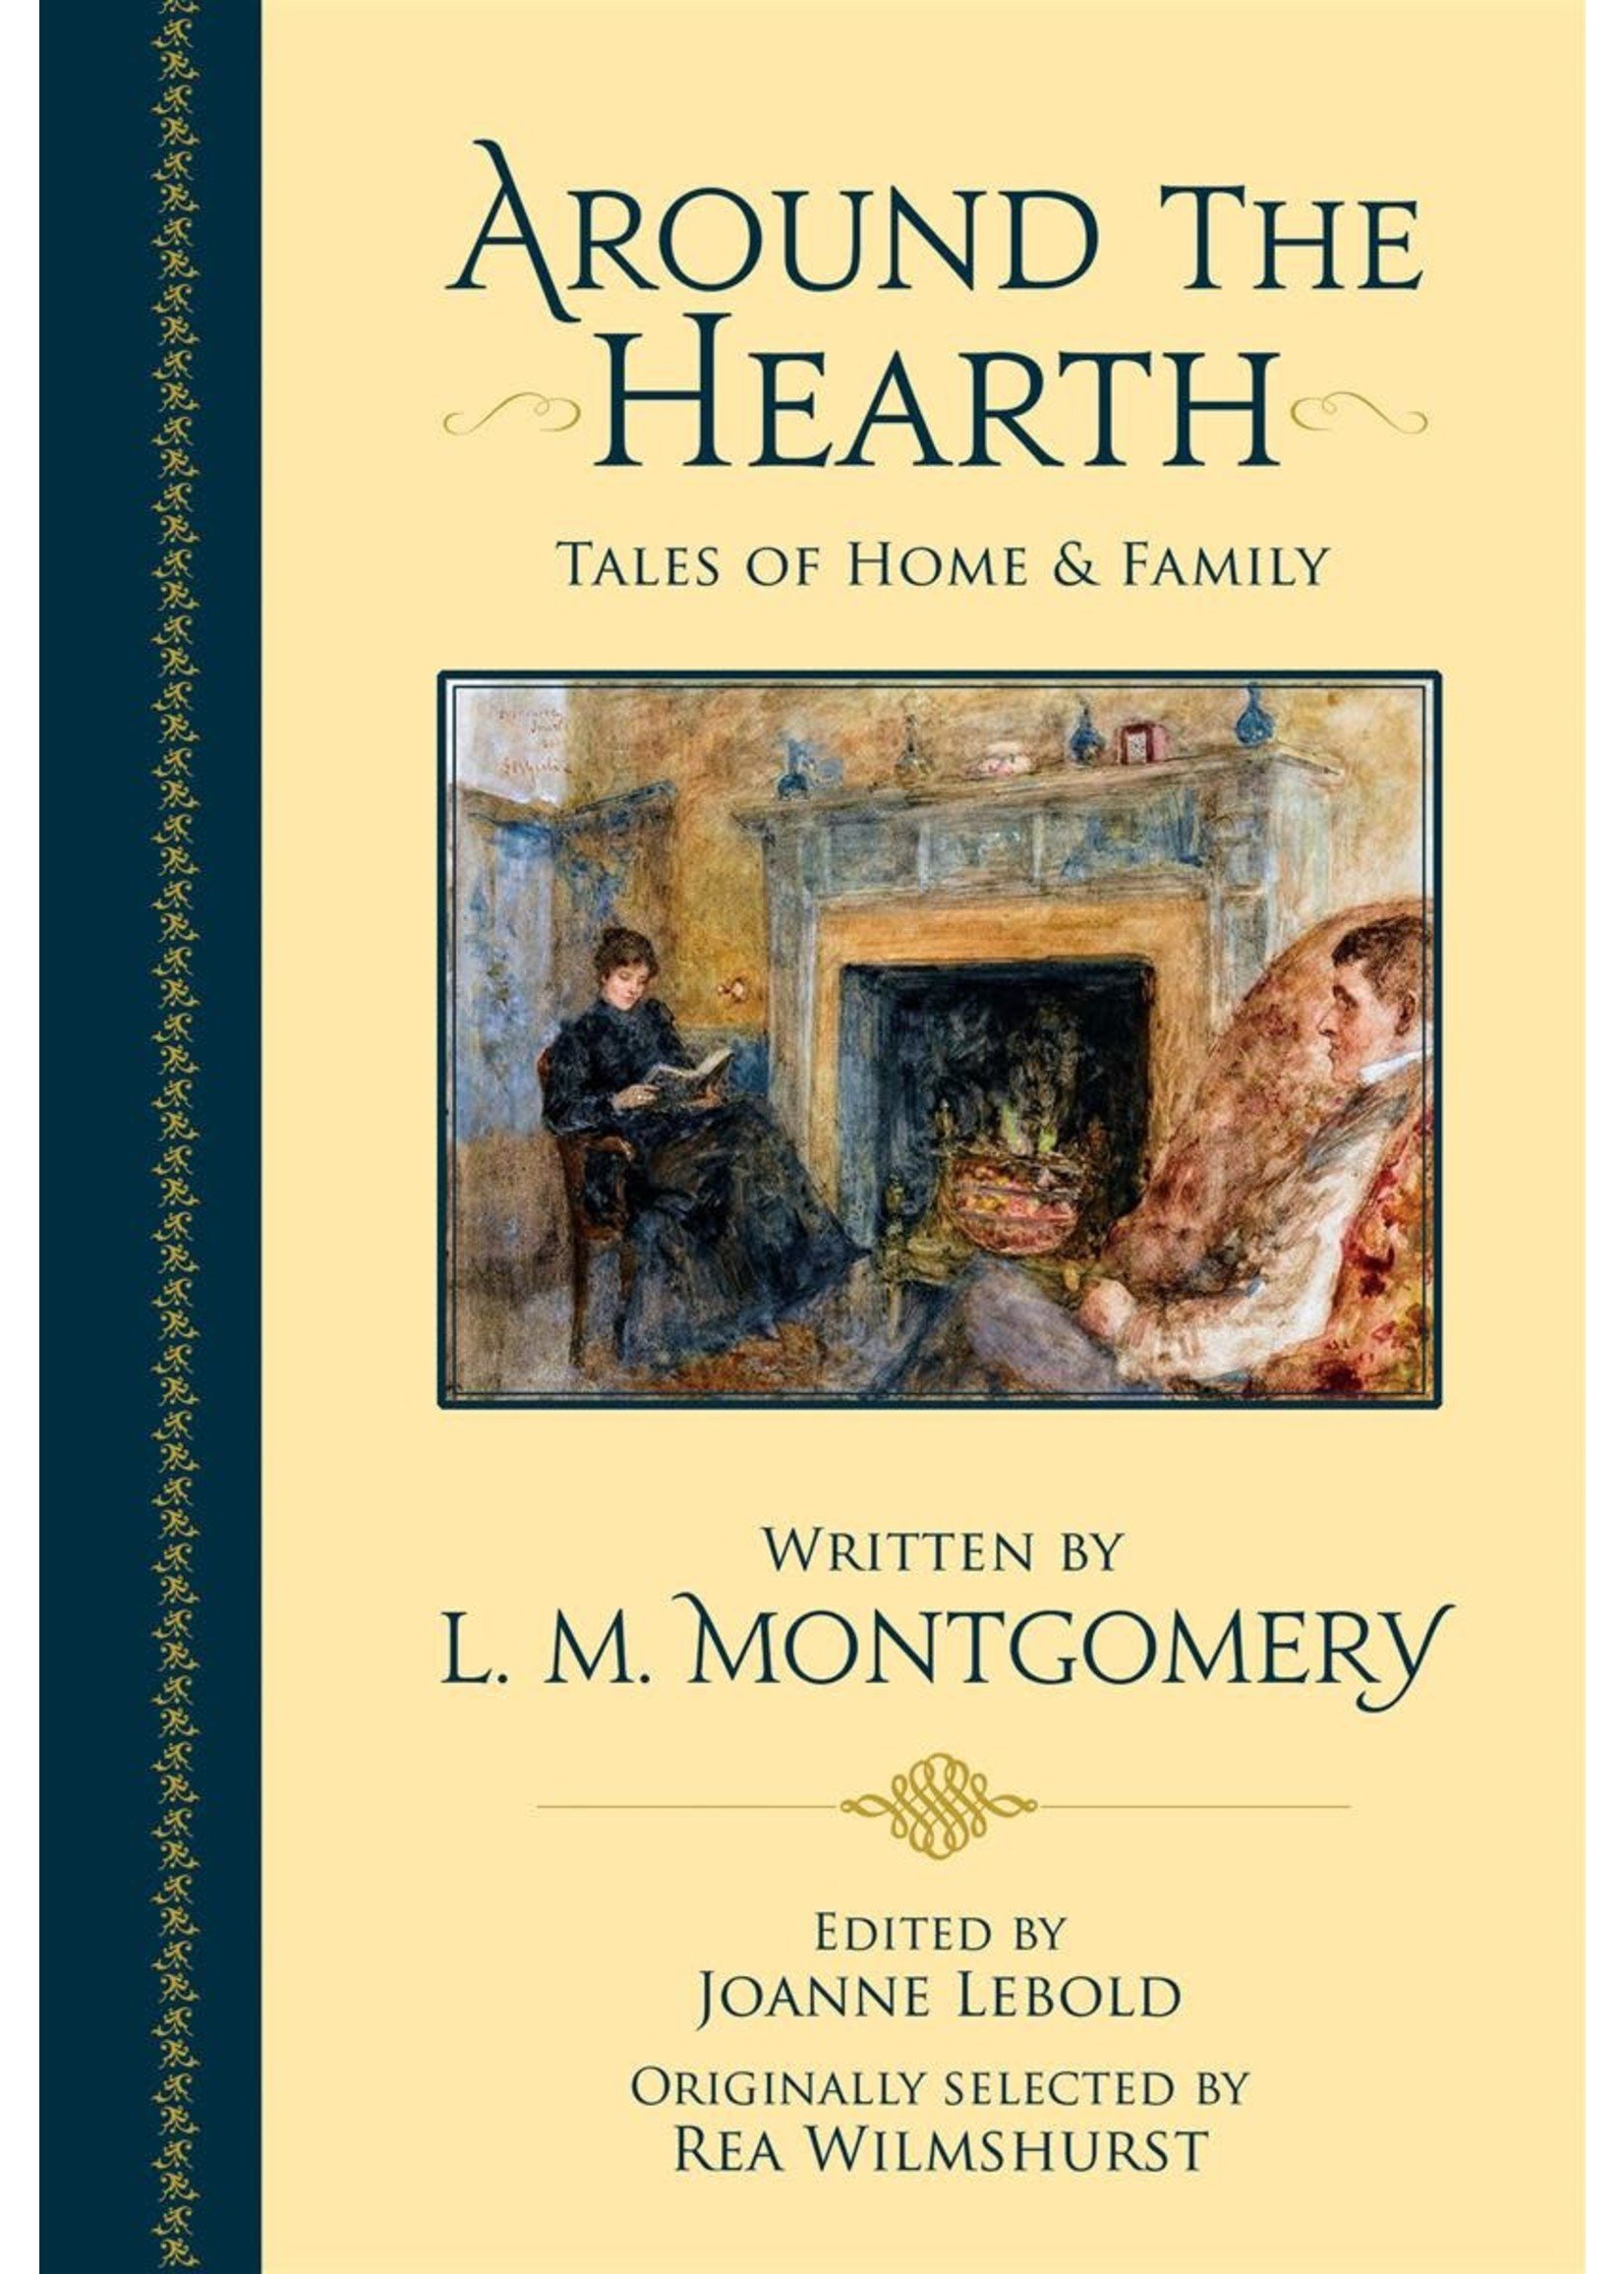 Around the Hearth Tales of Home and Family by JoanneLebold, Lucy Maud Montgomery